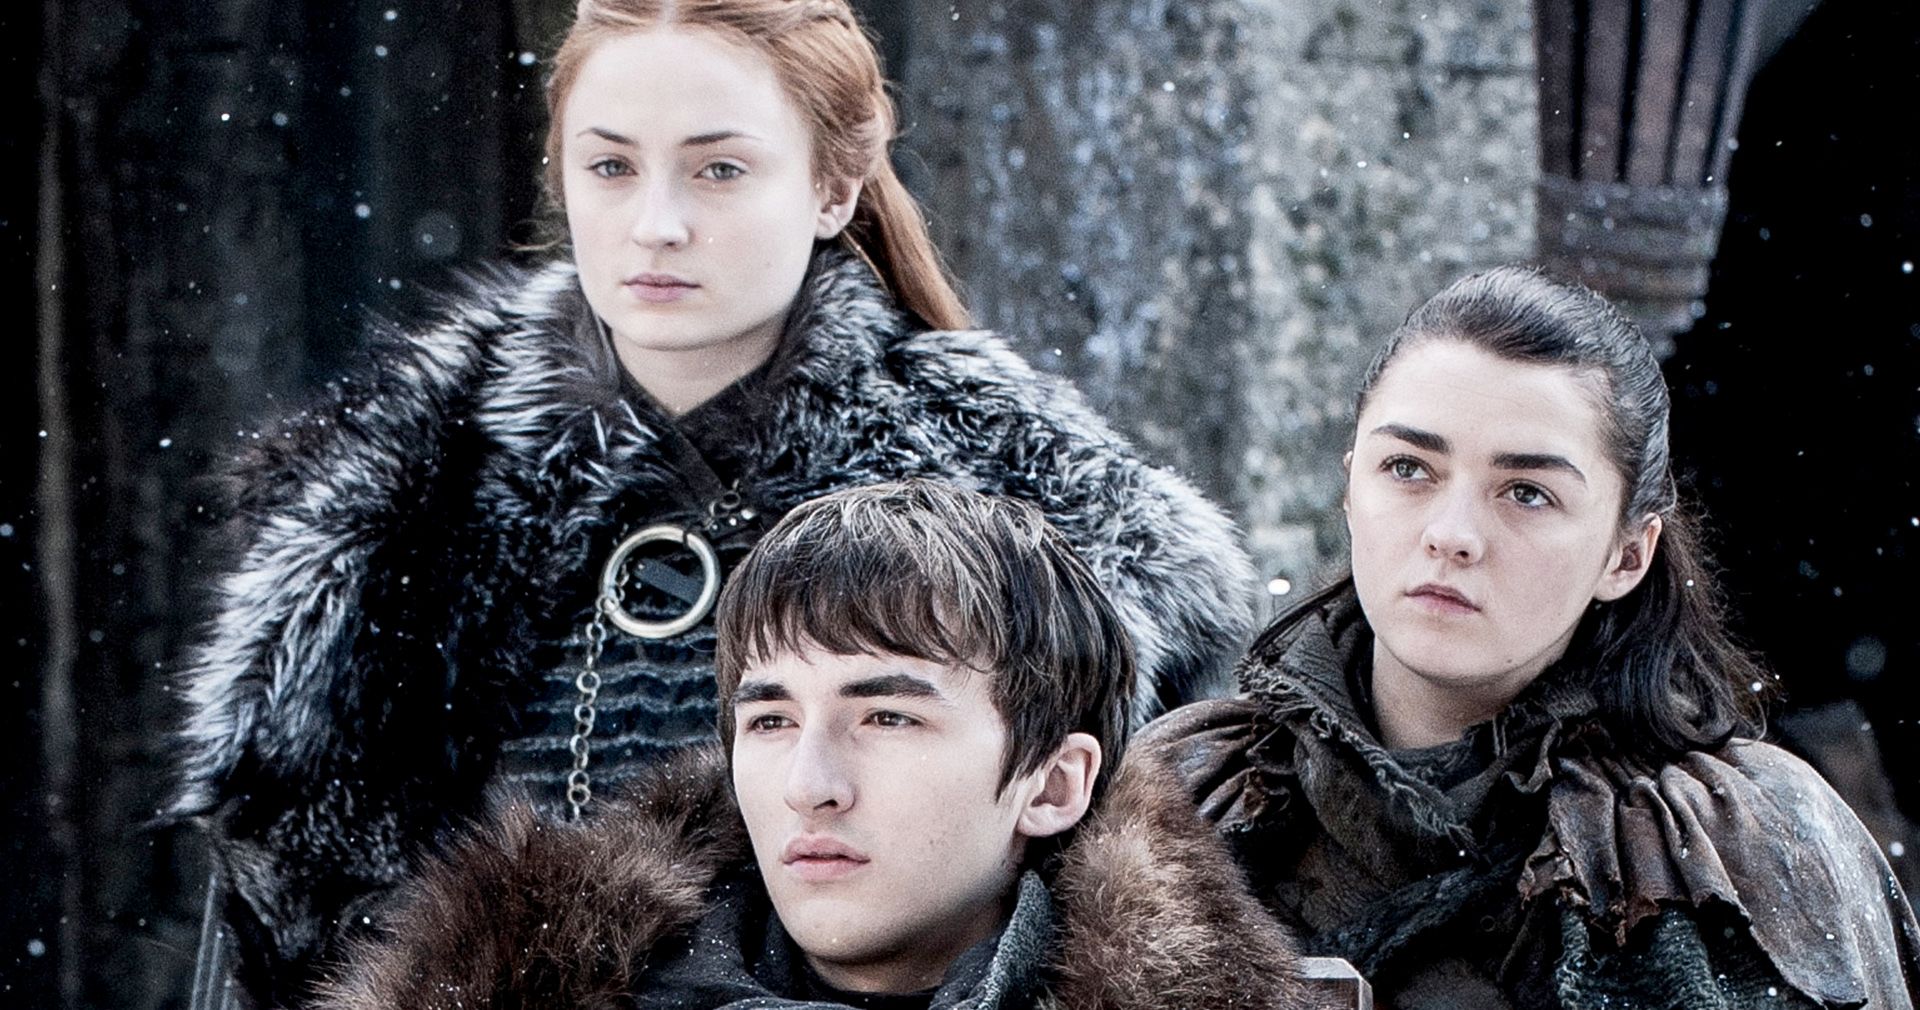 Game of Thrones MyersBriggs® Types Of The Starks